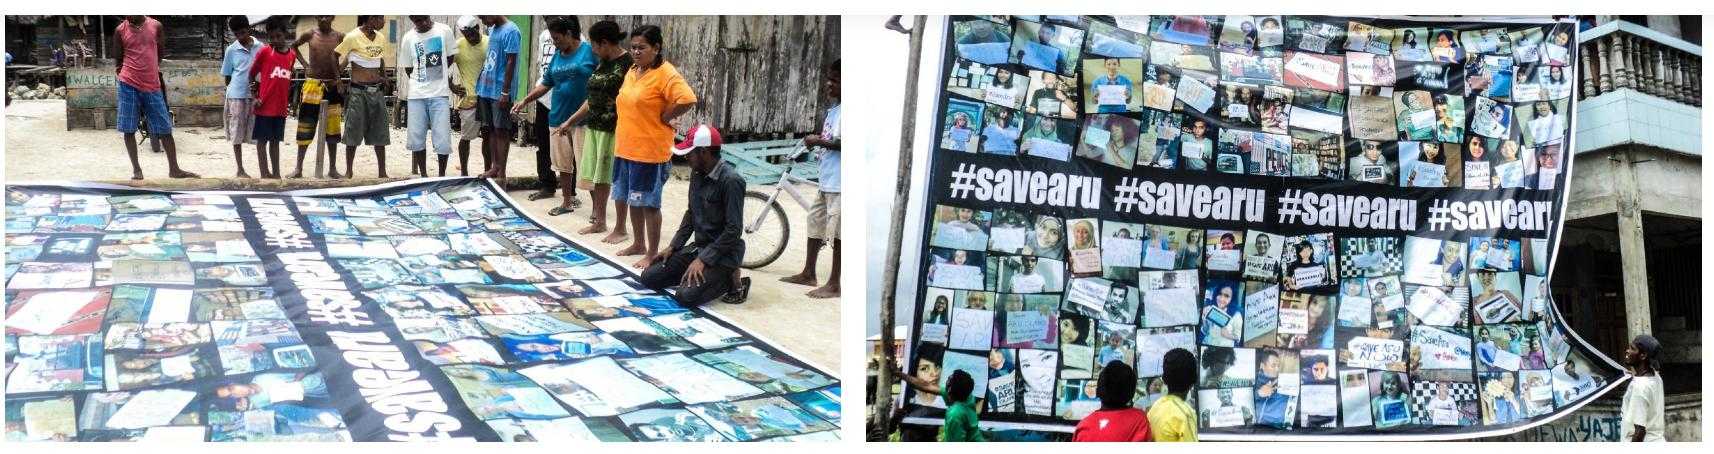 The Aru activists attracted the attention from across Indonesia and the world through social media. Their supporters set messages of support via Twitter, through photos in which they held up the hashtag #SaveAru.